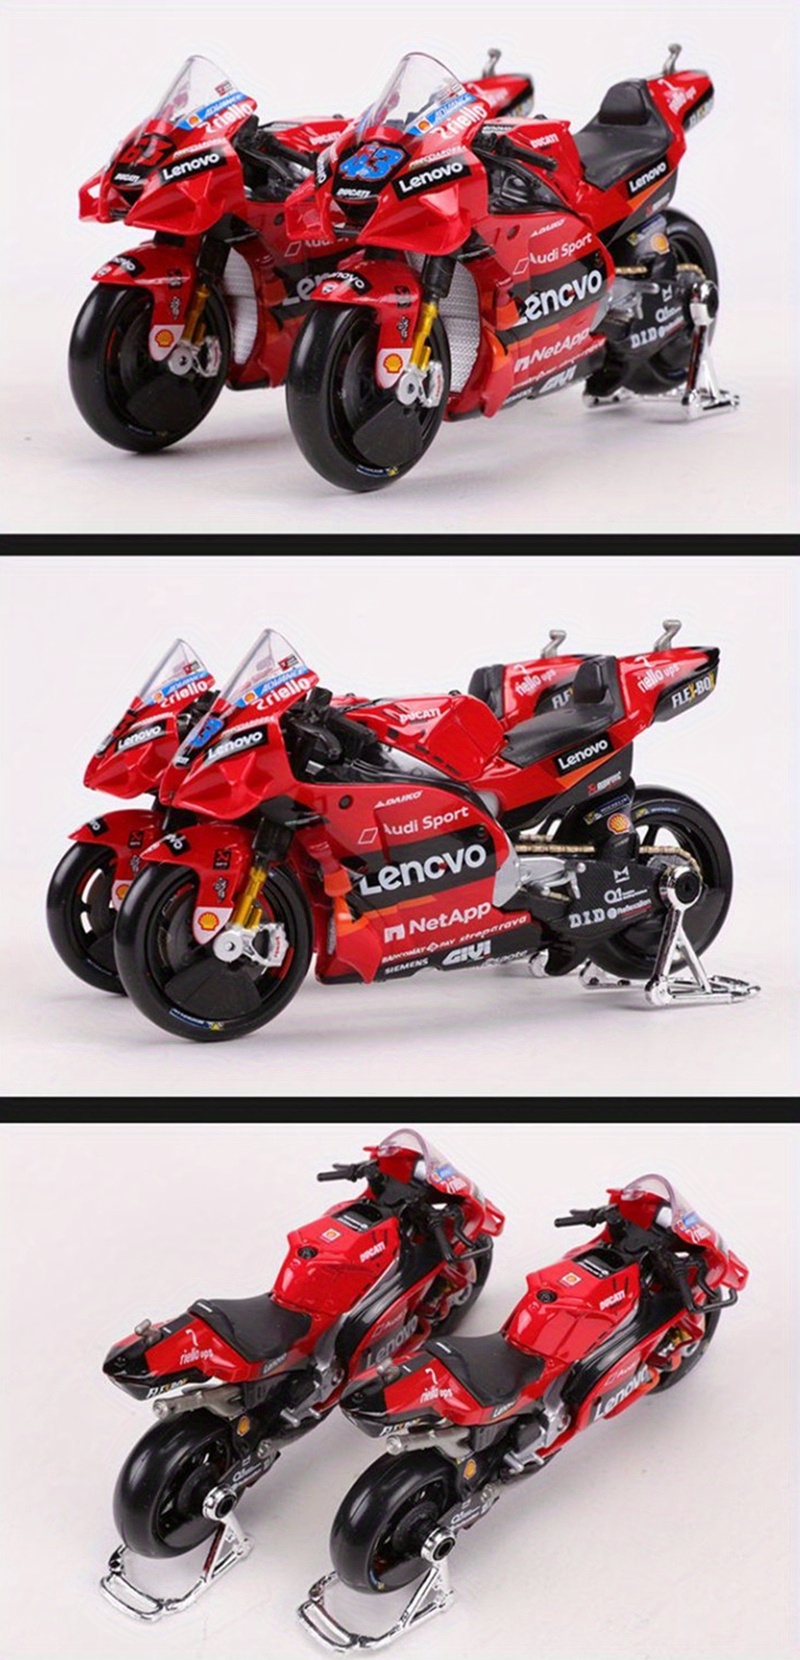 Maisto 1:18 NEW 2021 Ducati Lenovo Team #43 #63 Die Moto GP Racing casting  alloy motorcycle Model collection gift toy